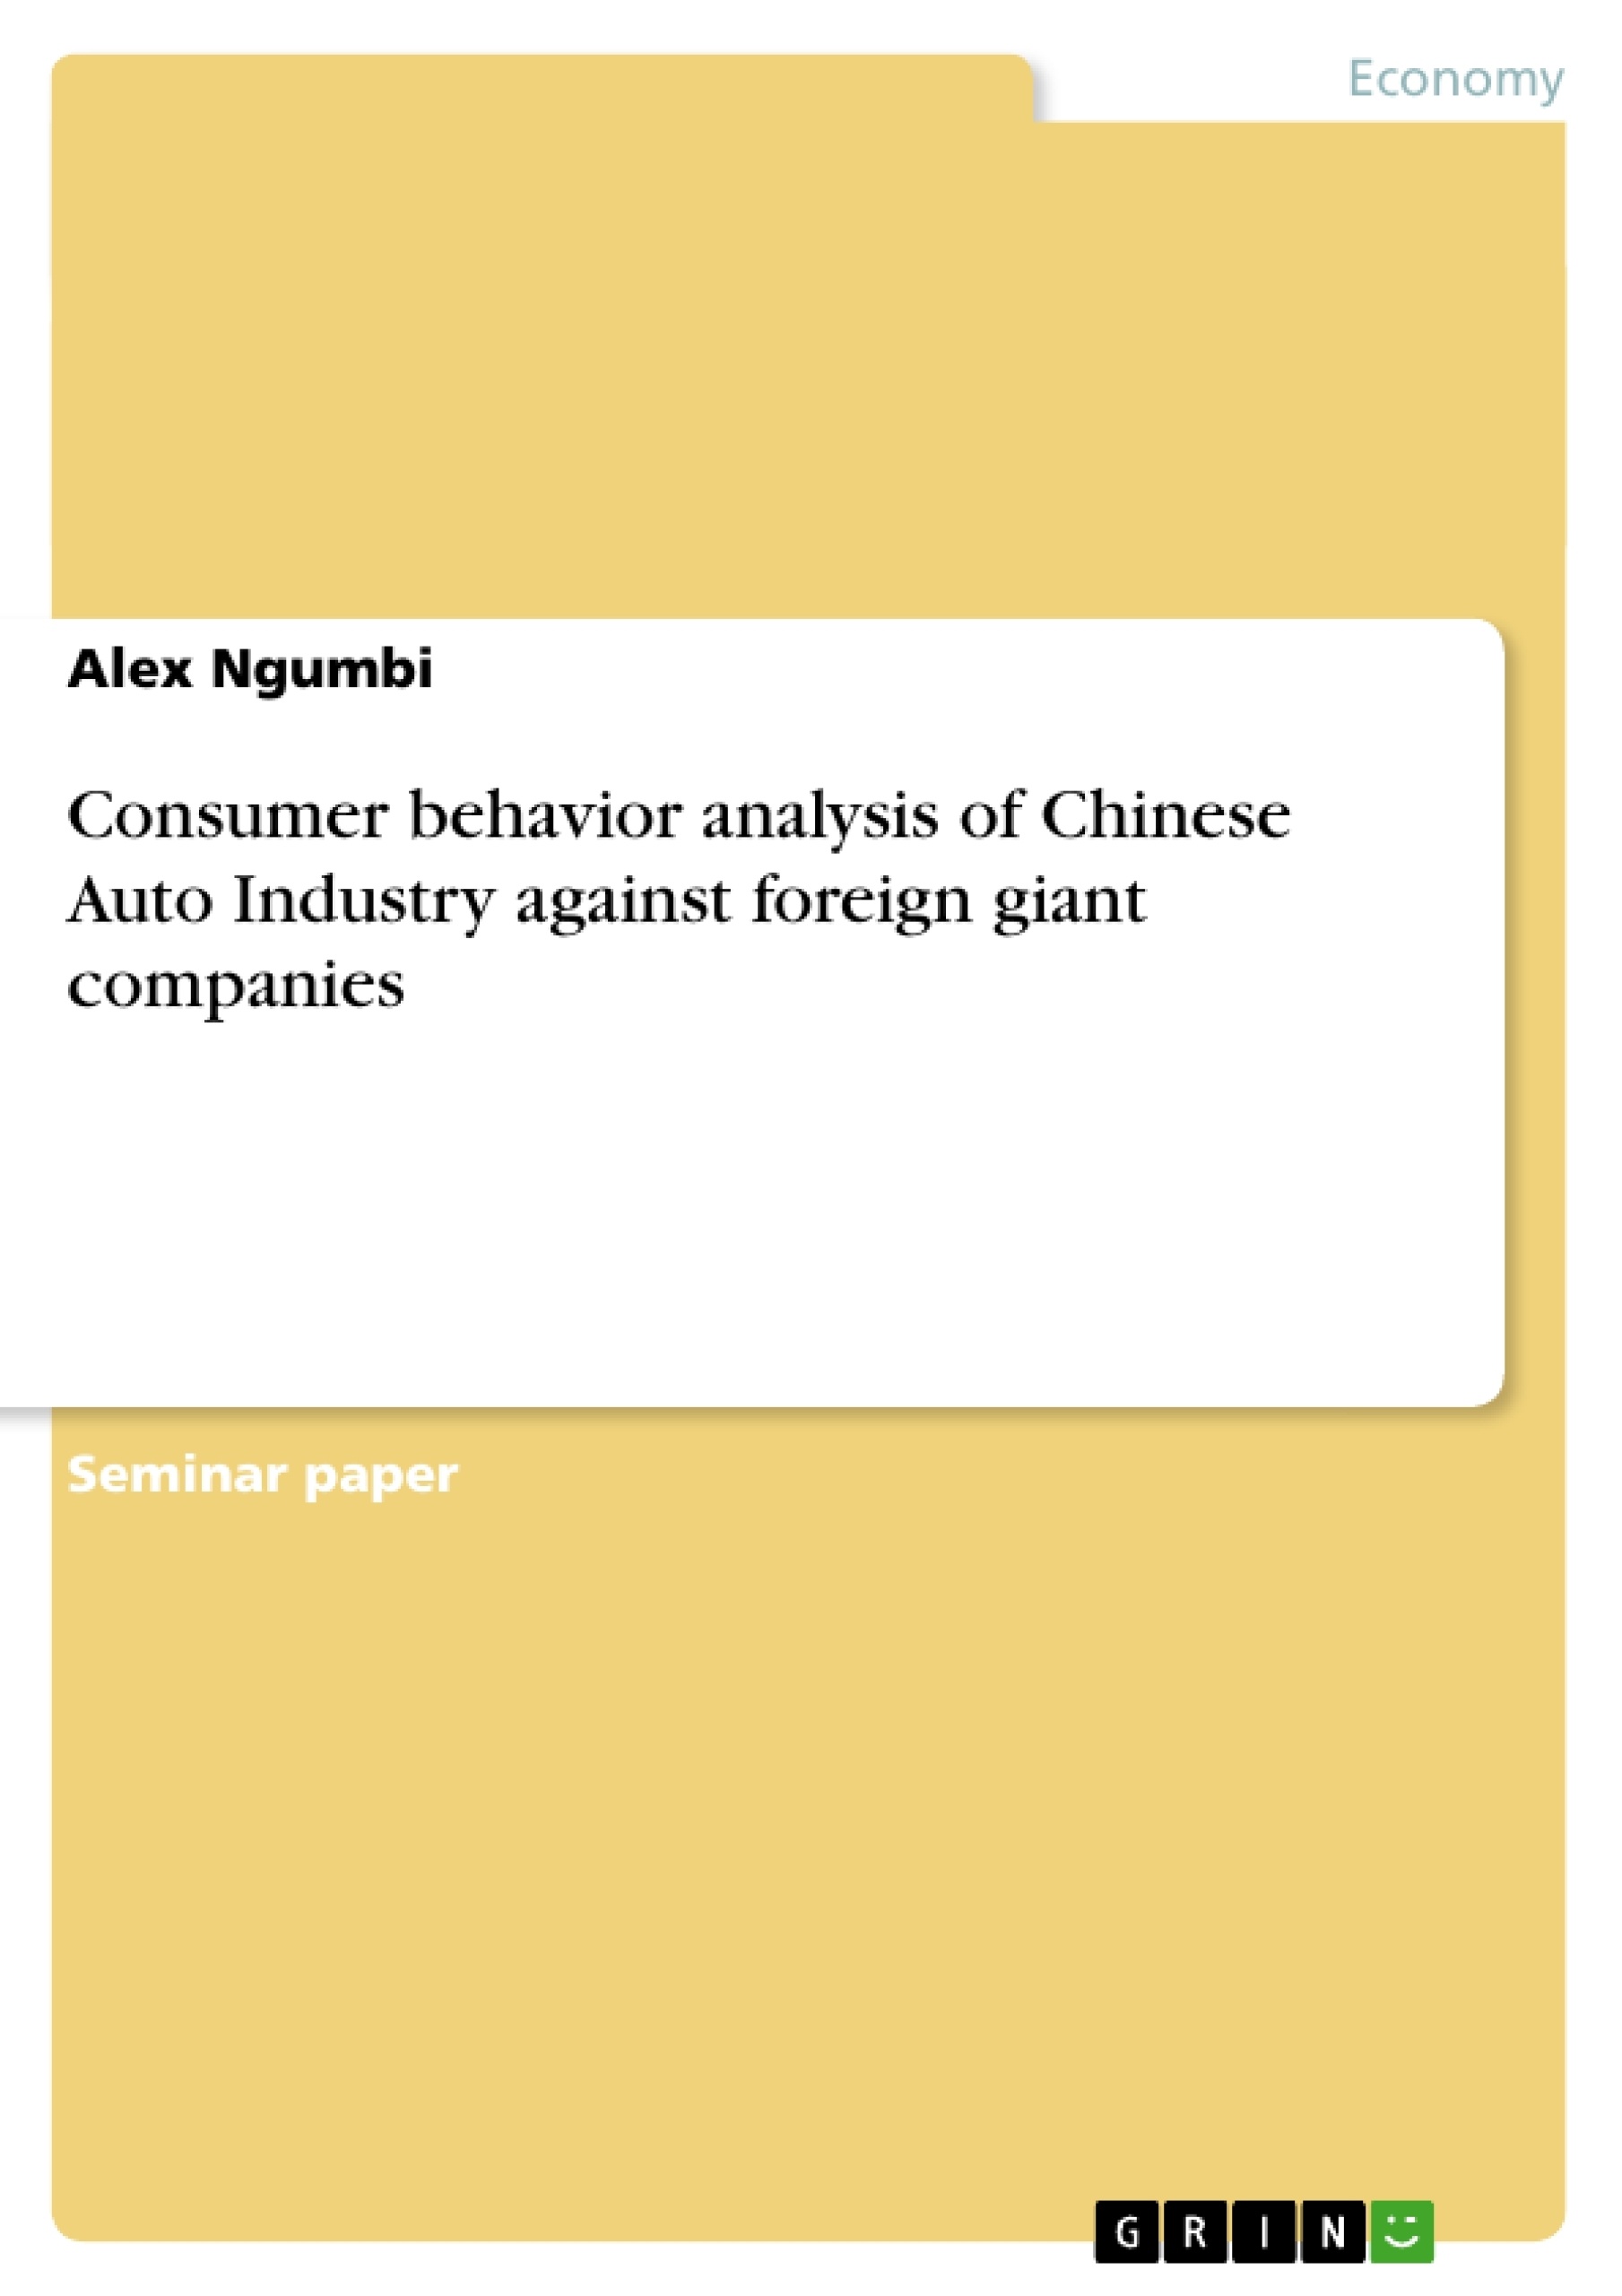 Title: Consumer behavior analysis of Chinese Auto Industry against foreign giant companies